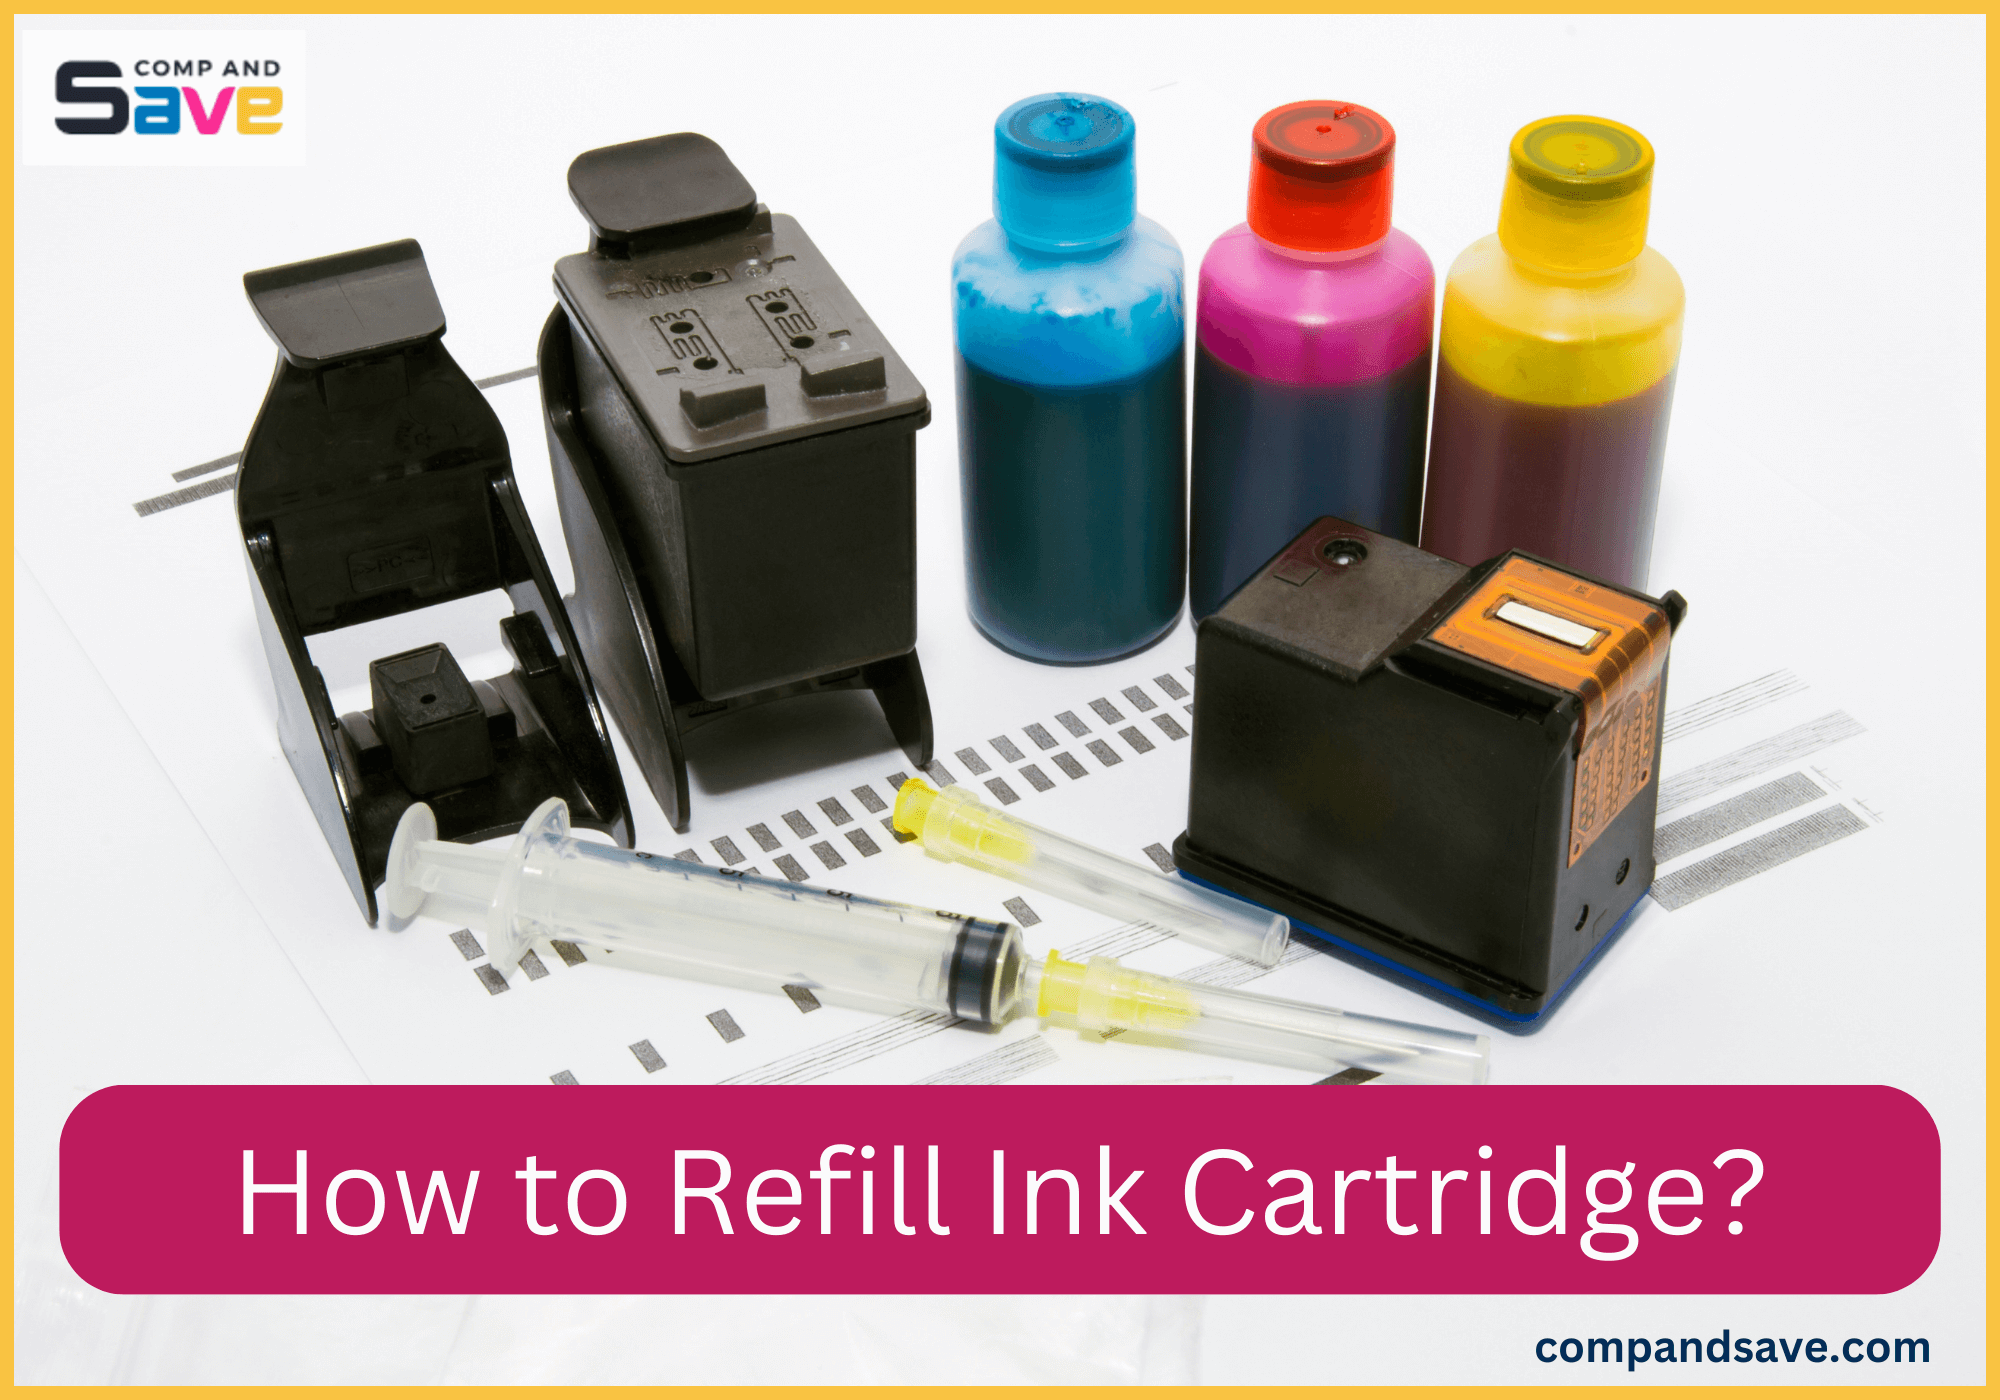 How to Refill Ink Cartridge? Printer Ink Refill Step-by-Step Guide